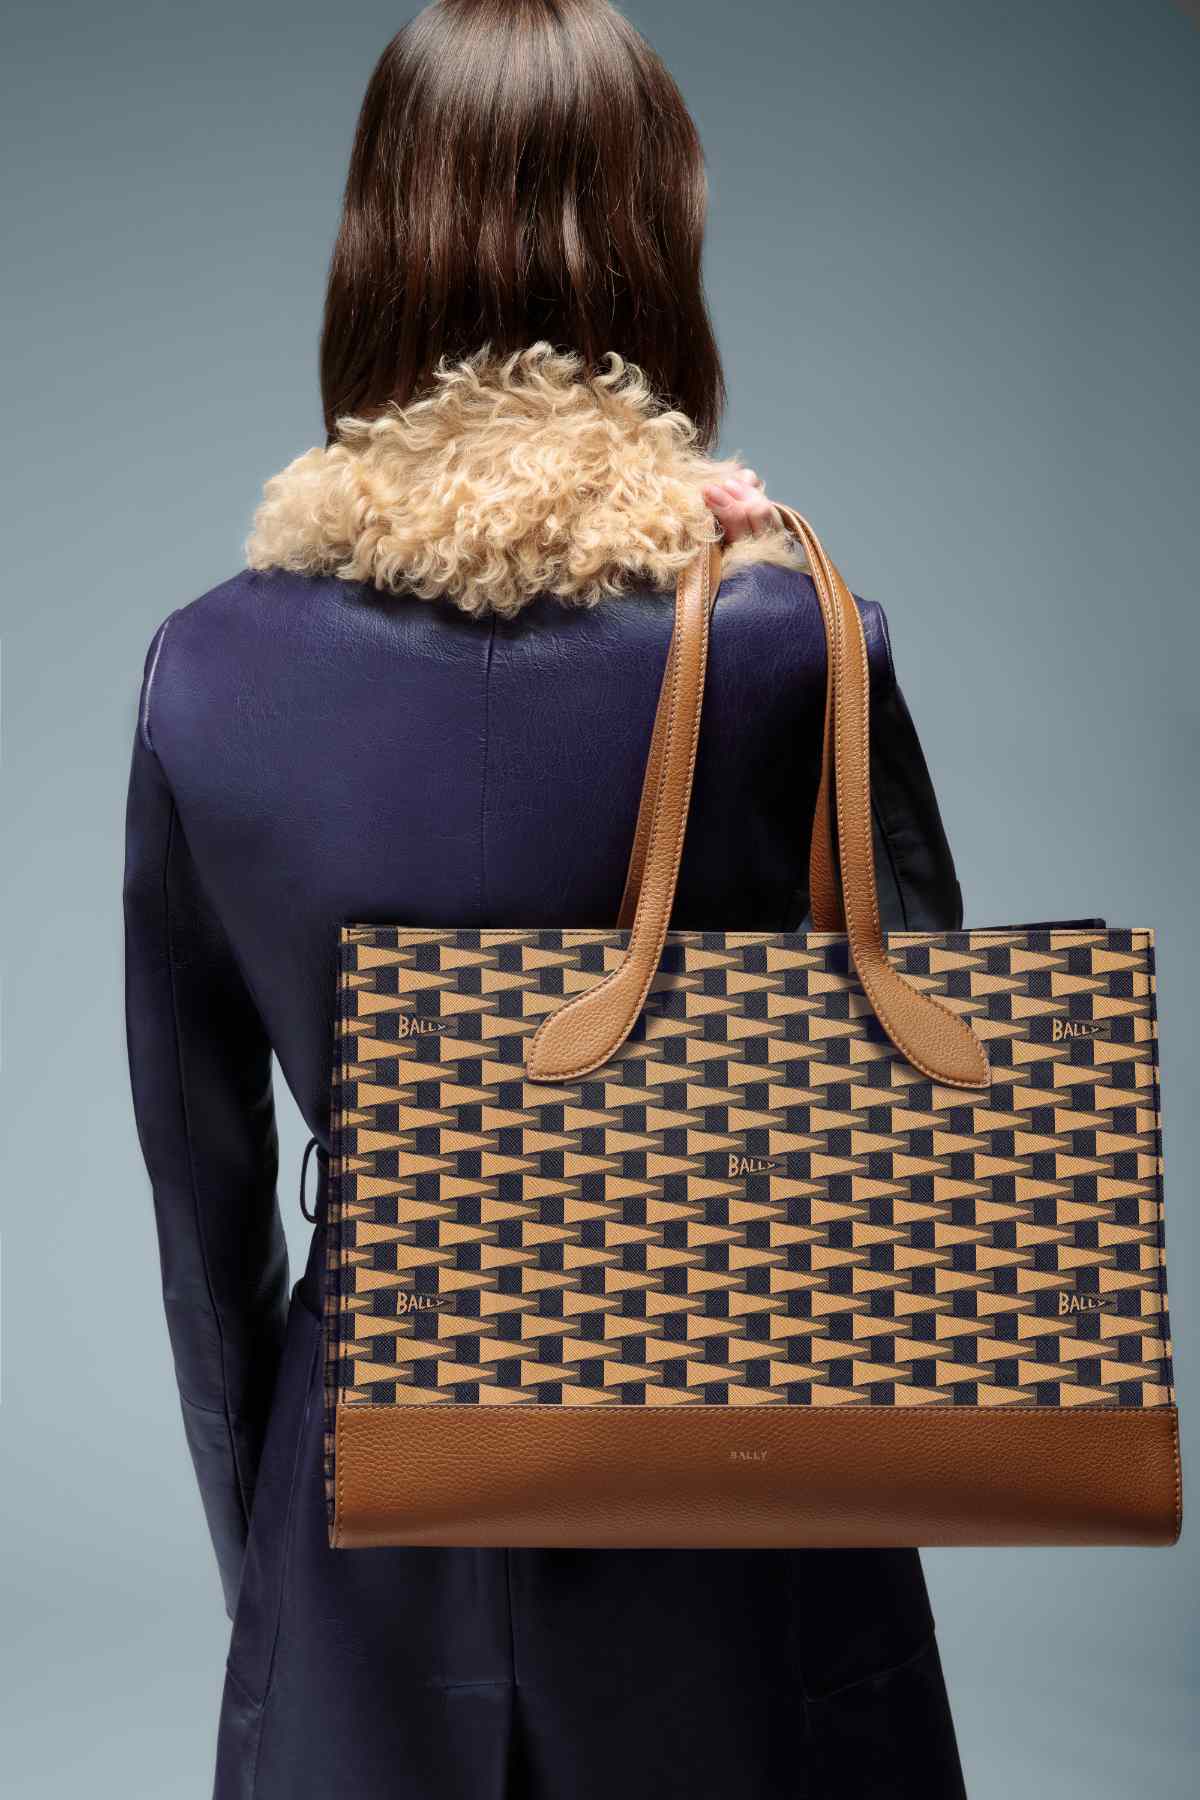 Bally Introduces Its New Pennant Motif